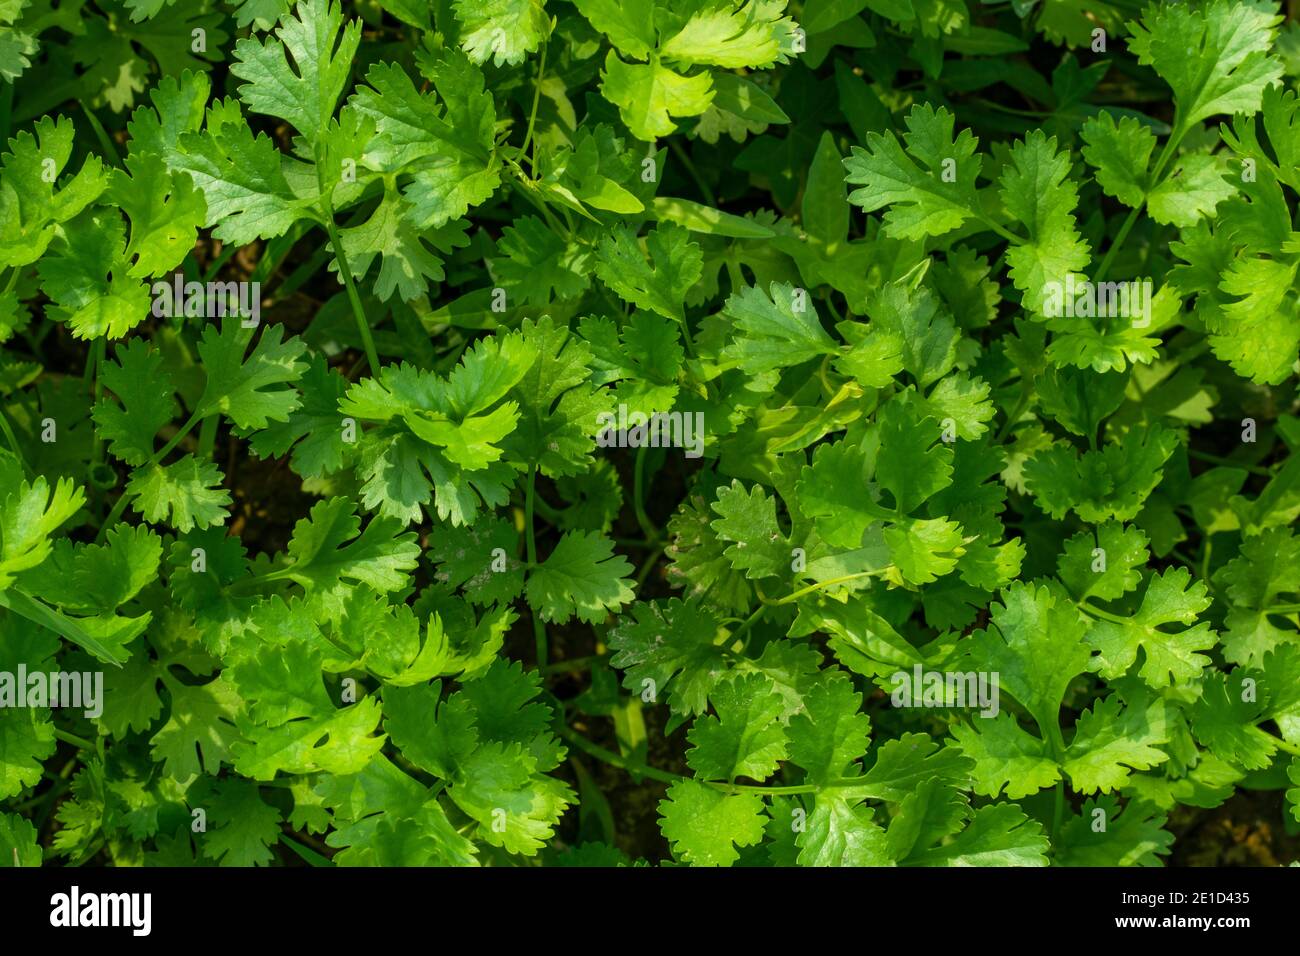 Top view of huge coriander leaf background texture Stock Photo